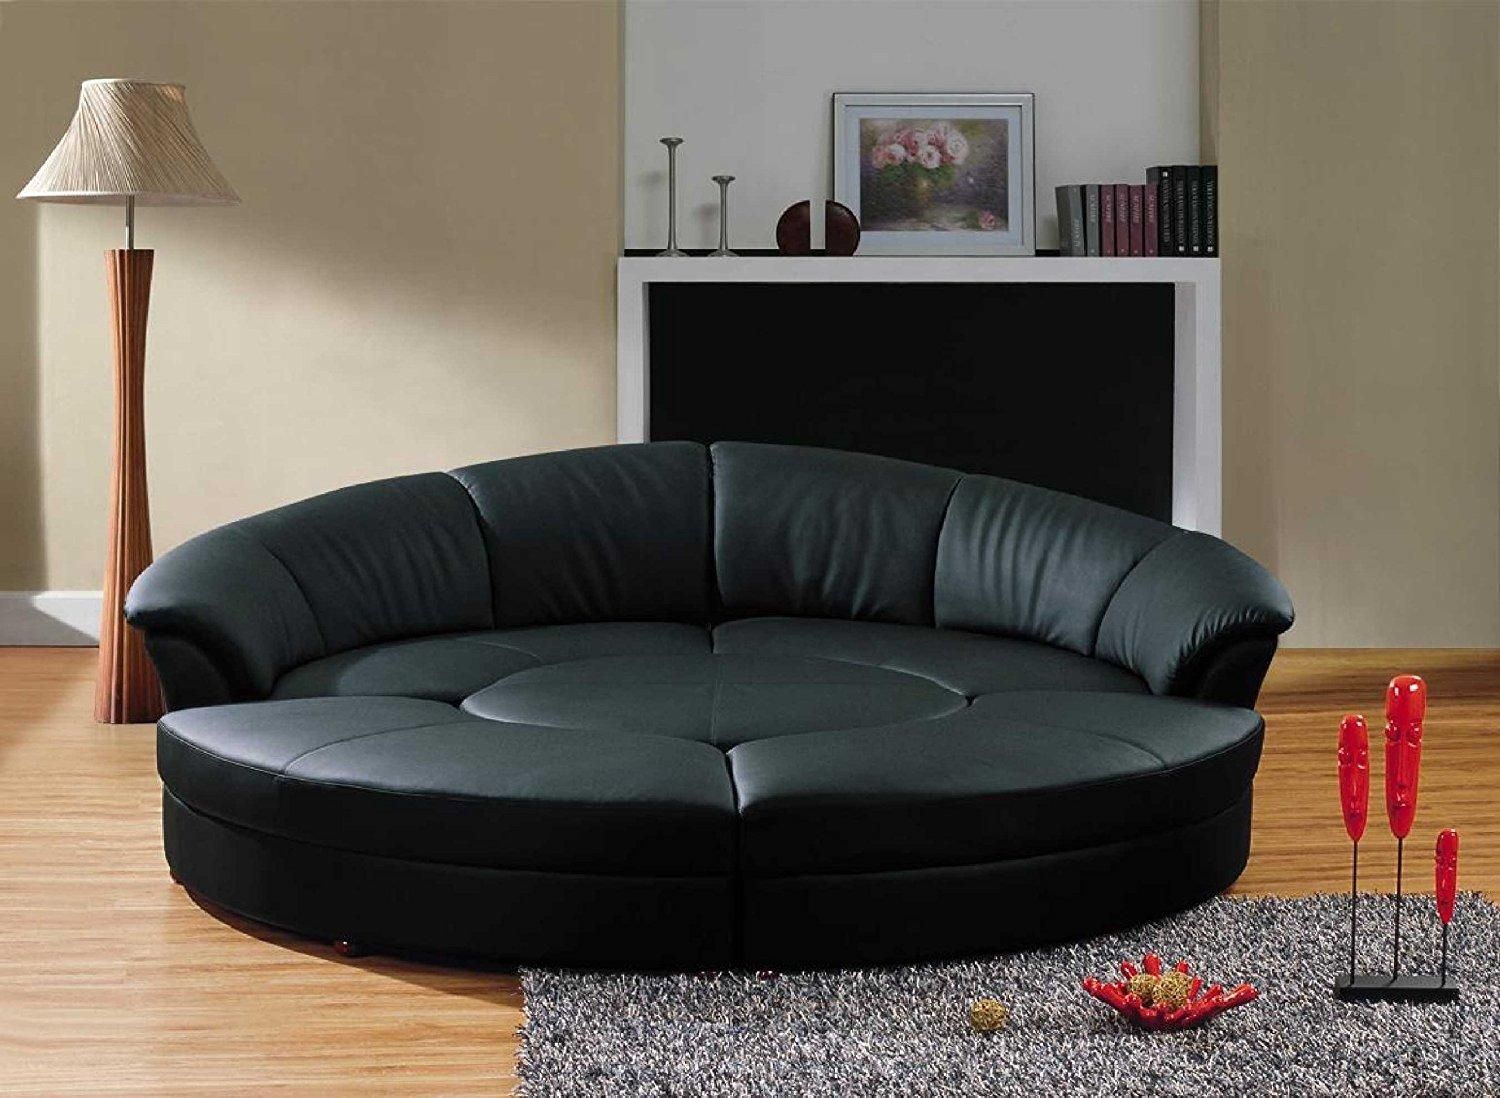 Sofa Round Chair Suppliers With Cup Holder Canada Living Room With Regard To Round Sofa Chair (View 8 of 20)